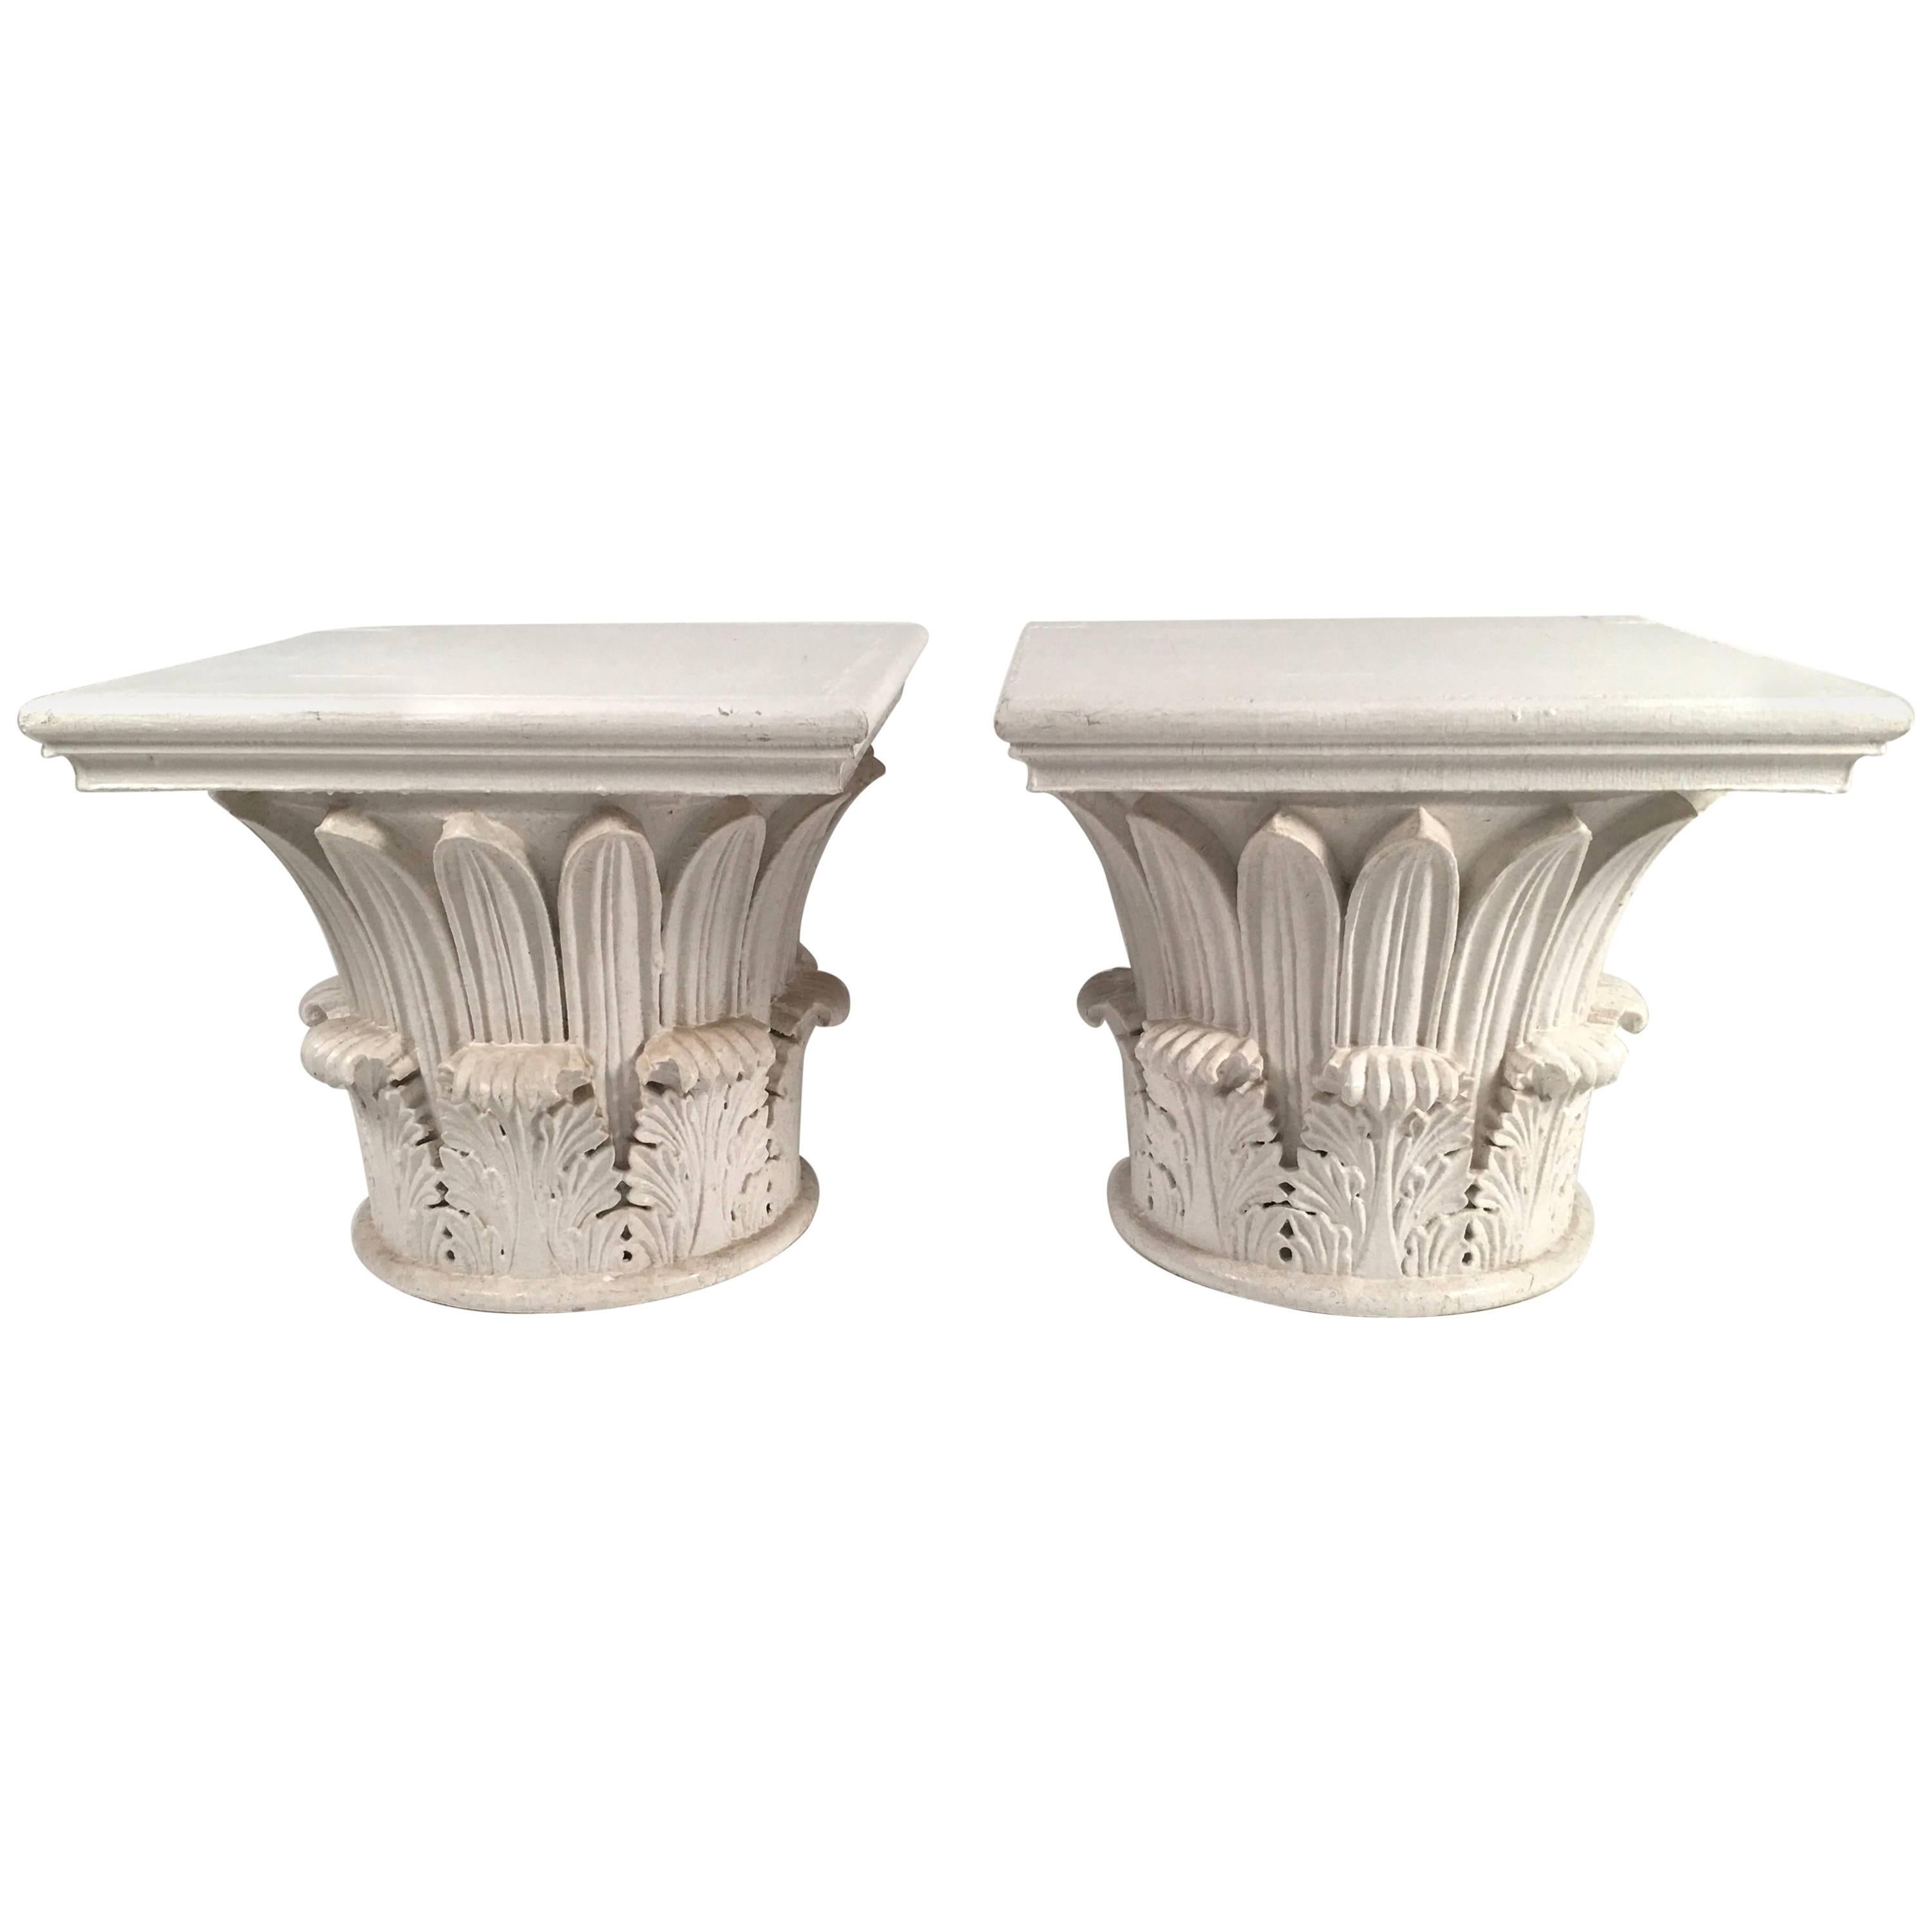 Pair of Carved and Painted Wood Neoclassical Column Capital Tables